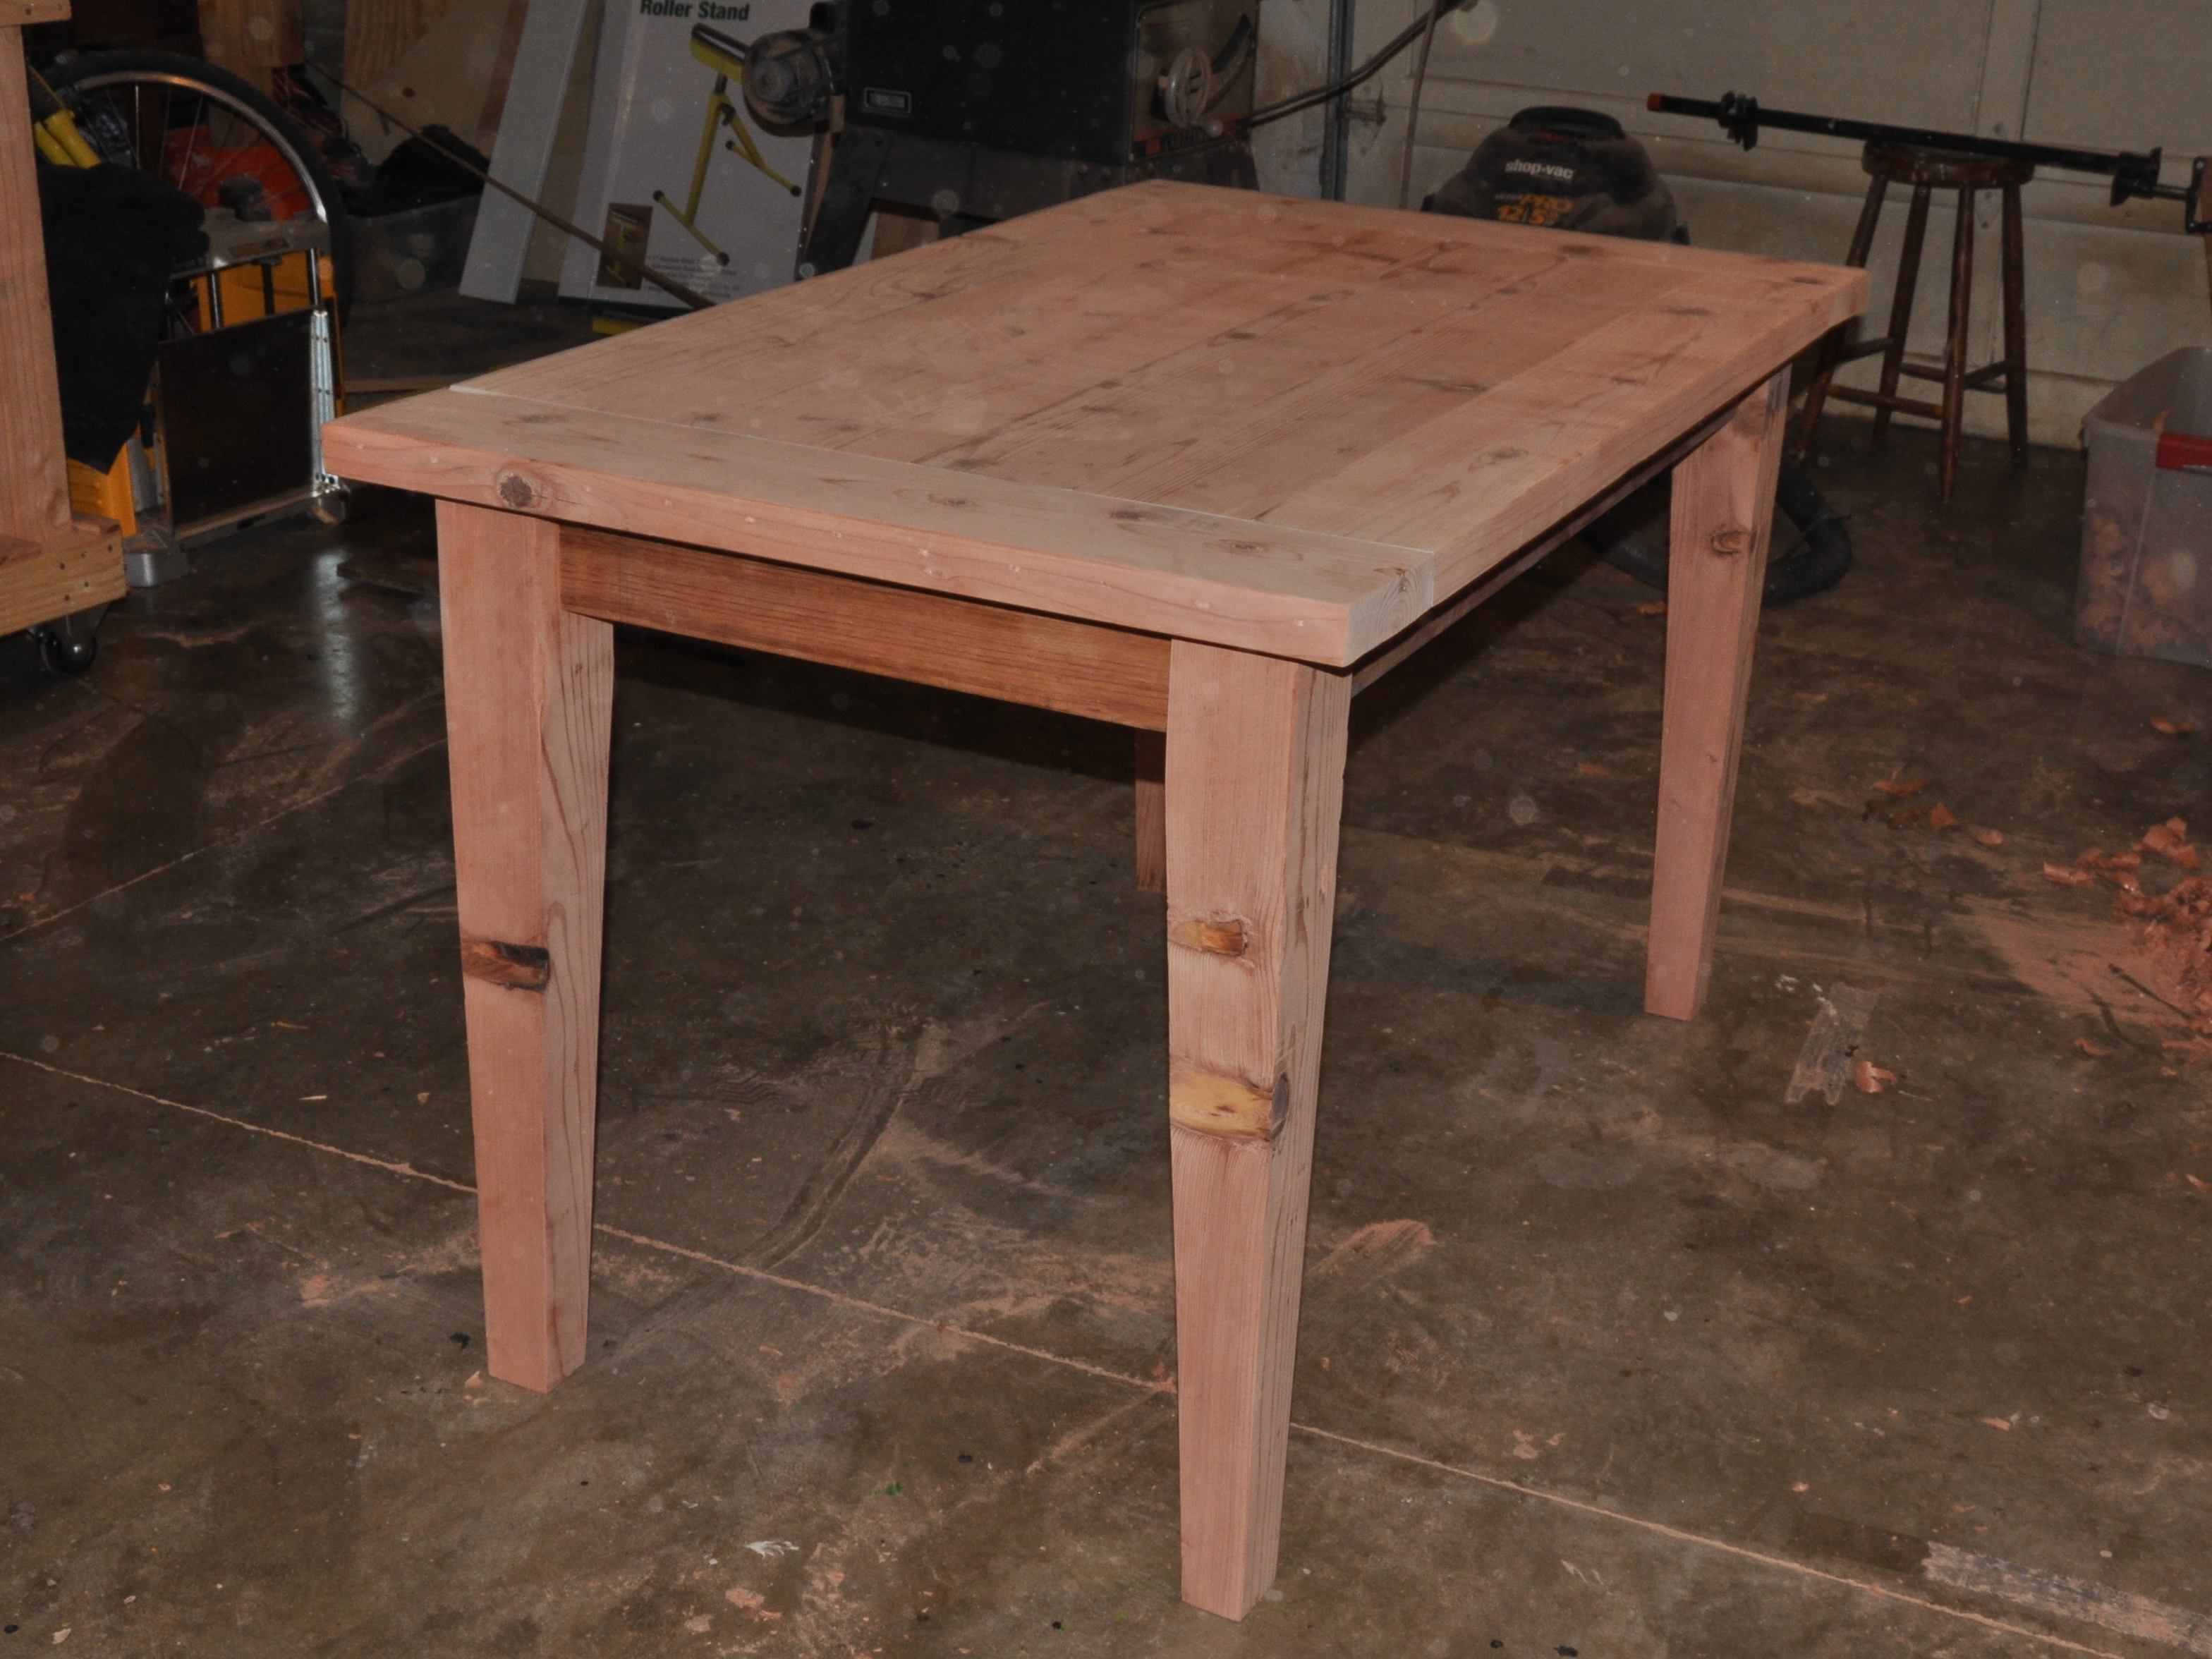 Make a Wooden Table that is Easily Disassembled | Make: